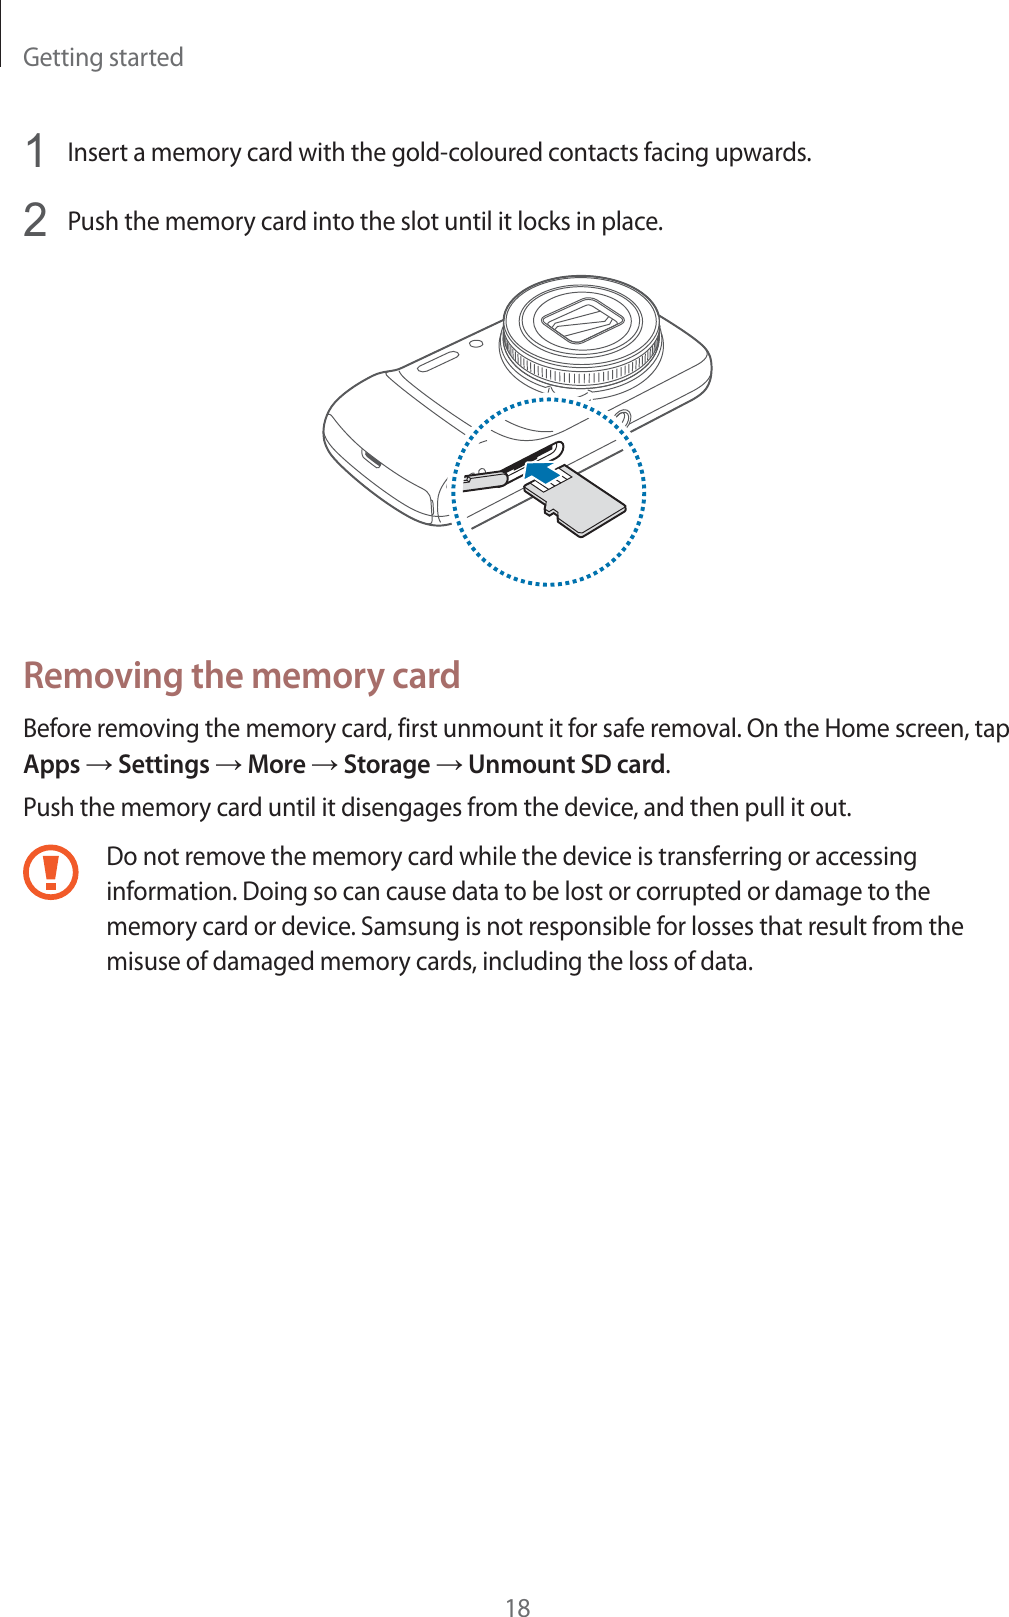 Getting started181Insert a memory card with the gold-coloured contacts facing upwards.2Push the memory card into the slot until it locks in place.Removing the memory cardBefore removing the memory card, first unmount it for safe removal. On the Home screen, tap Apps  Settings  More  Storage  Unmount SD card.Push the memory card until it disengages from the device, and then pull it out.Do not remove the memory card while the device is transferring or accessing information. Doing so can cause data to be lost or corrupted or damage to the memory card or device. Samsung is not responsible for losses that result from the misuse of damaged memory cards, including the loss of data.